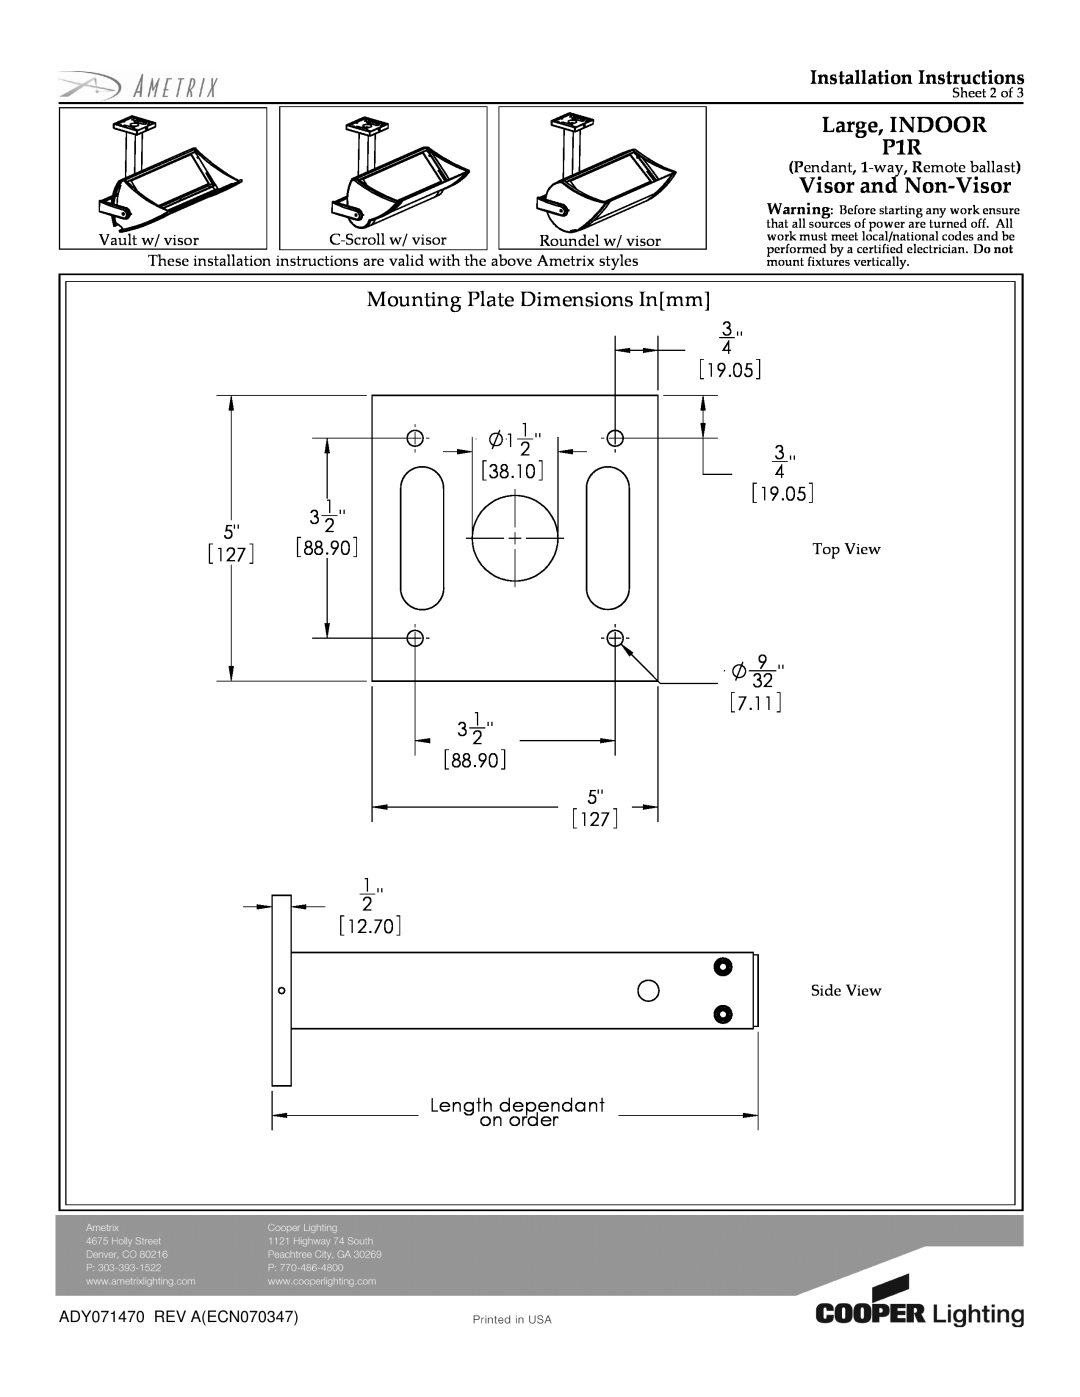 Cooper Lighting Indoor Lighting Mounting Plate Dimensions Inmm, Large, INDOOR P1R, Visor and Non-Visor 